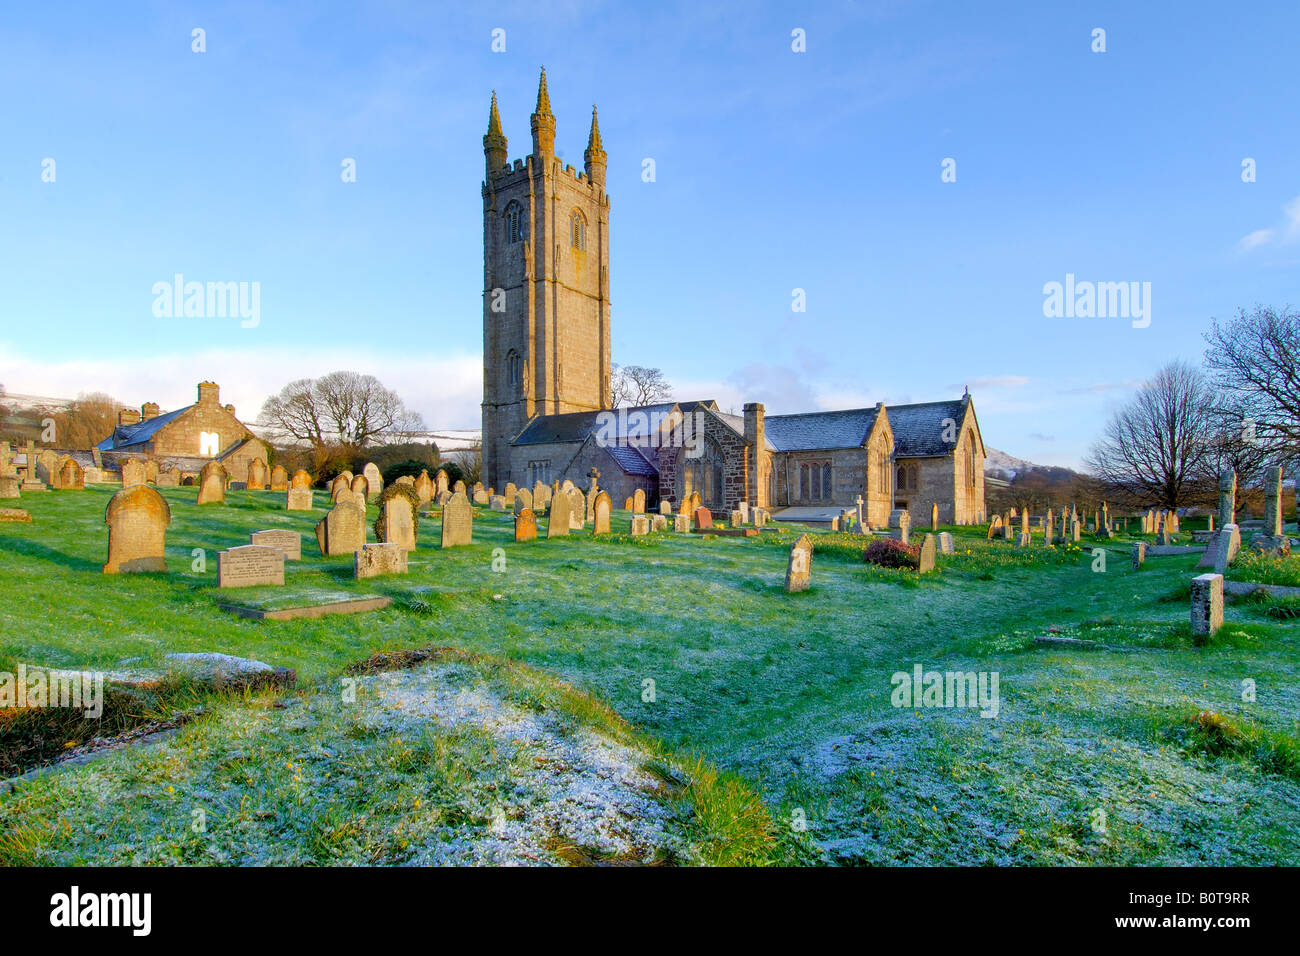 The Church of St Pancras at Widecombe in The Moor on Dartmoor first thing in the morning after a light overnight snowfall Stock Photo